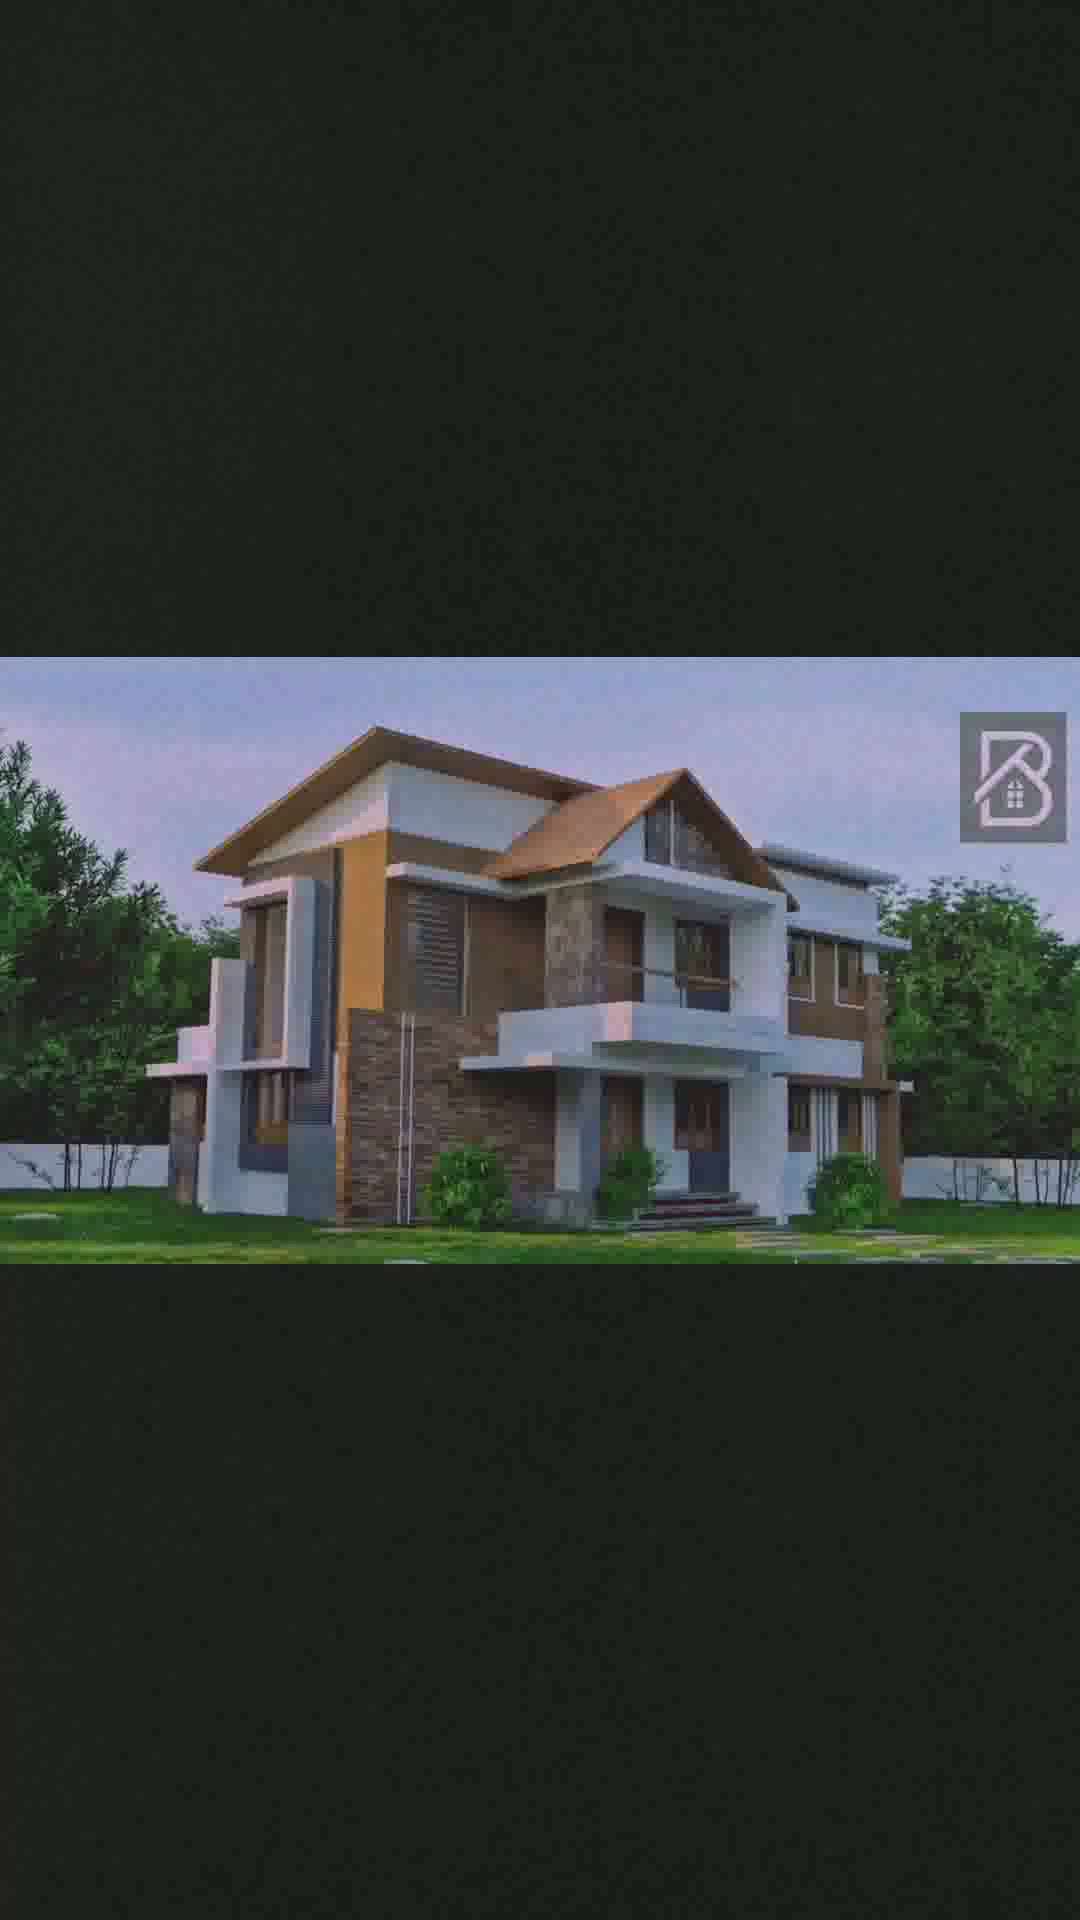 Location - Kodungallur Thrissur,
Client name - Haris
Model -  Contemporary 
Total area - 2150 Sq ft
Type of work -Standard
Total Cost - 40 Lakh 
 #Residentialprojects
#ContemporaryHouse
#villaconstrction
#climateadaptive 
 #3D_ELEVATION  #3Dexterior #colonialhouse #contomporory